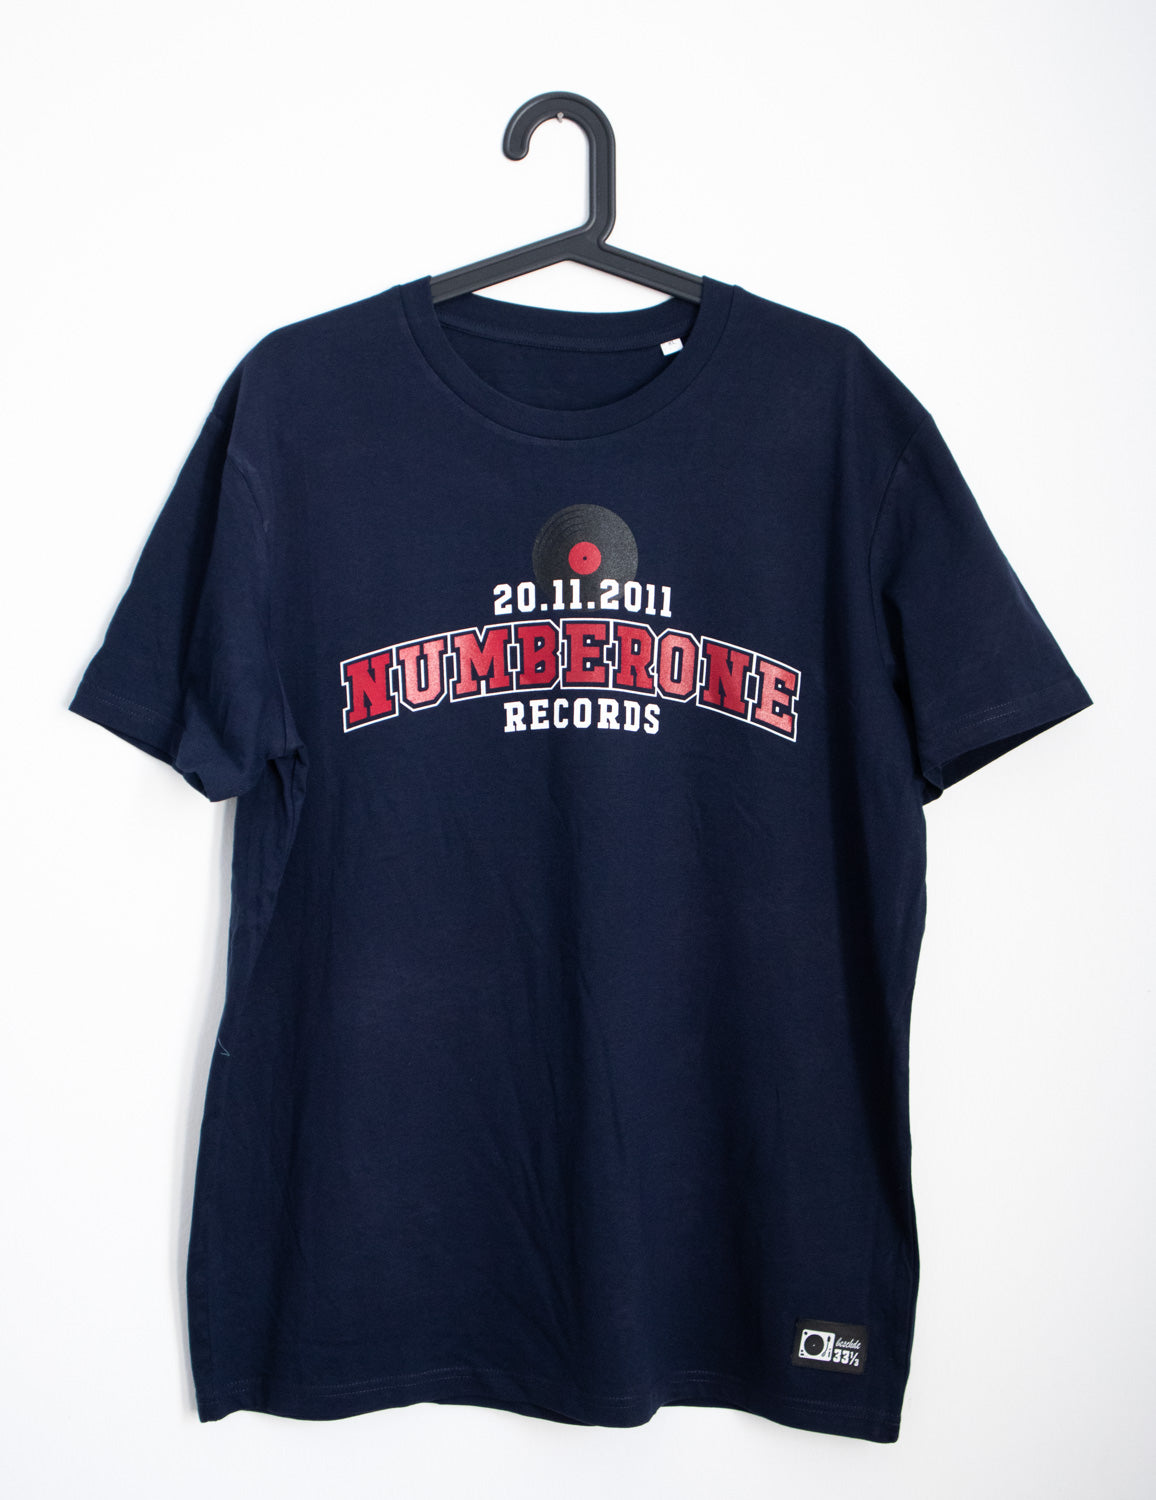 T-Shirt Number One Records Navy Blau